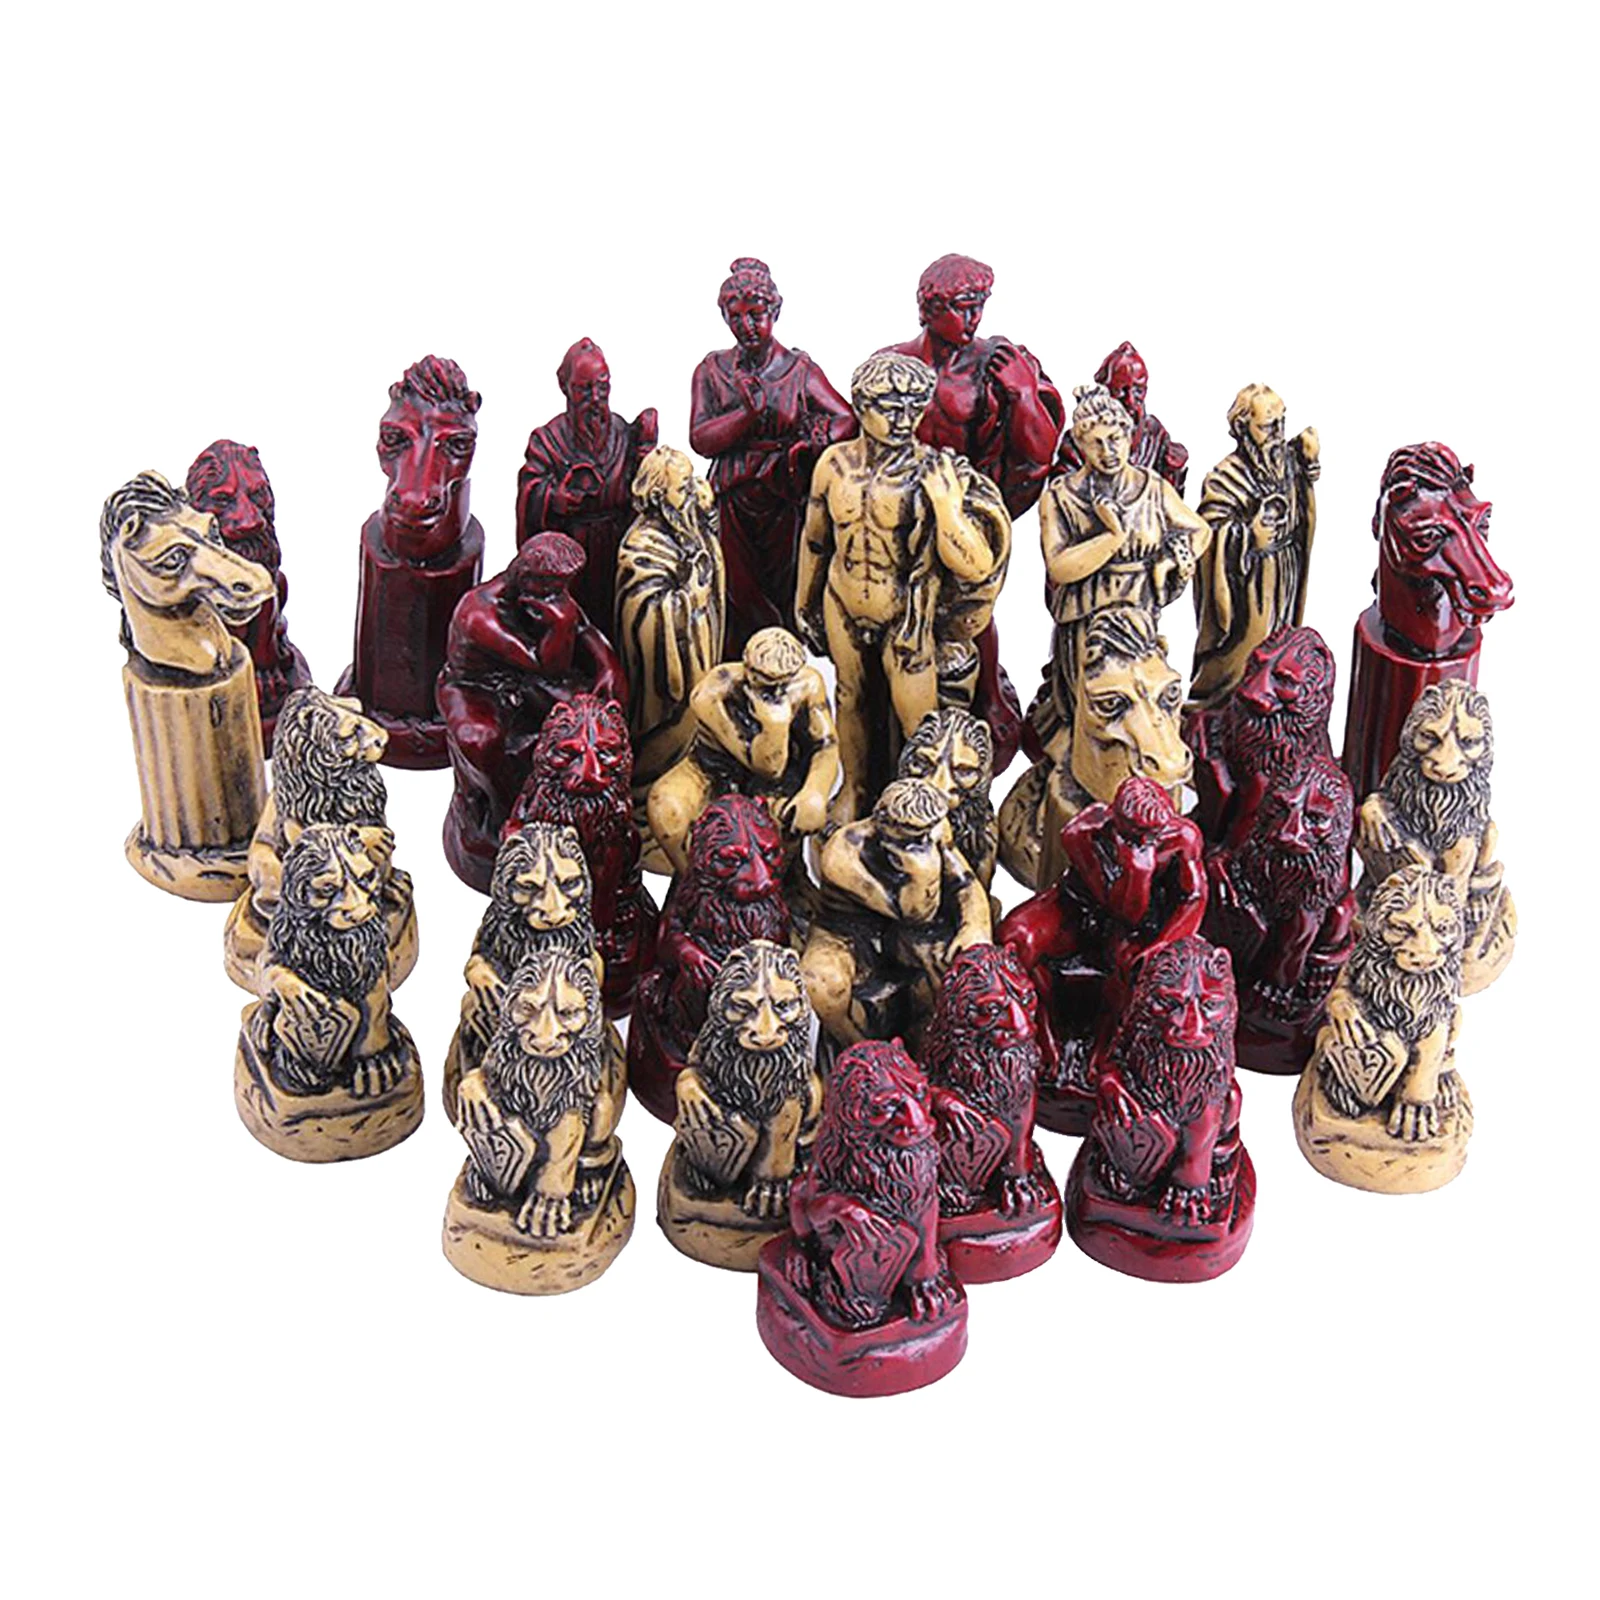 32pcs Chess Pieces, Antique Roman Checkers Chess Set Portable Game for Family, Gift for Kids Adult Friends, Chessmen Set